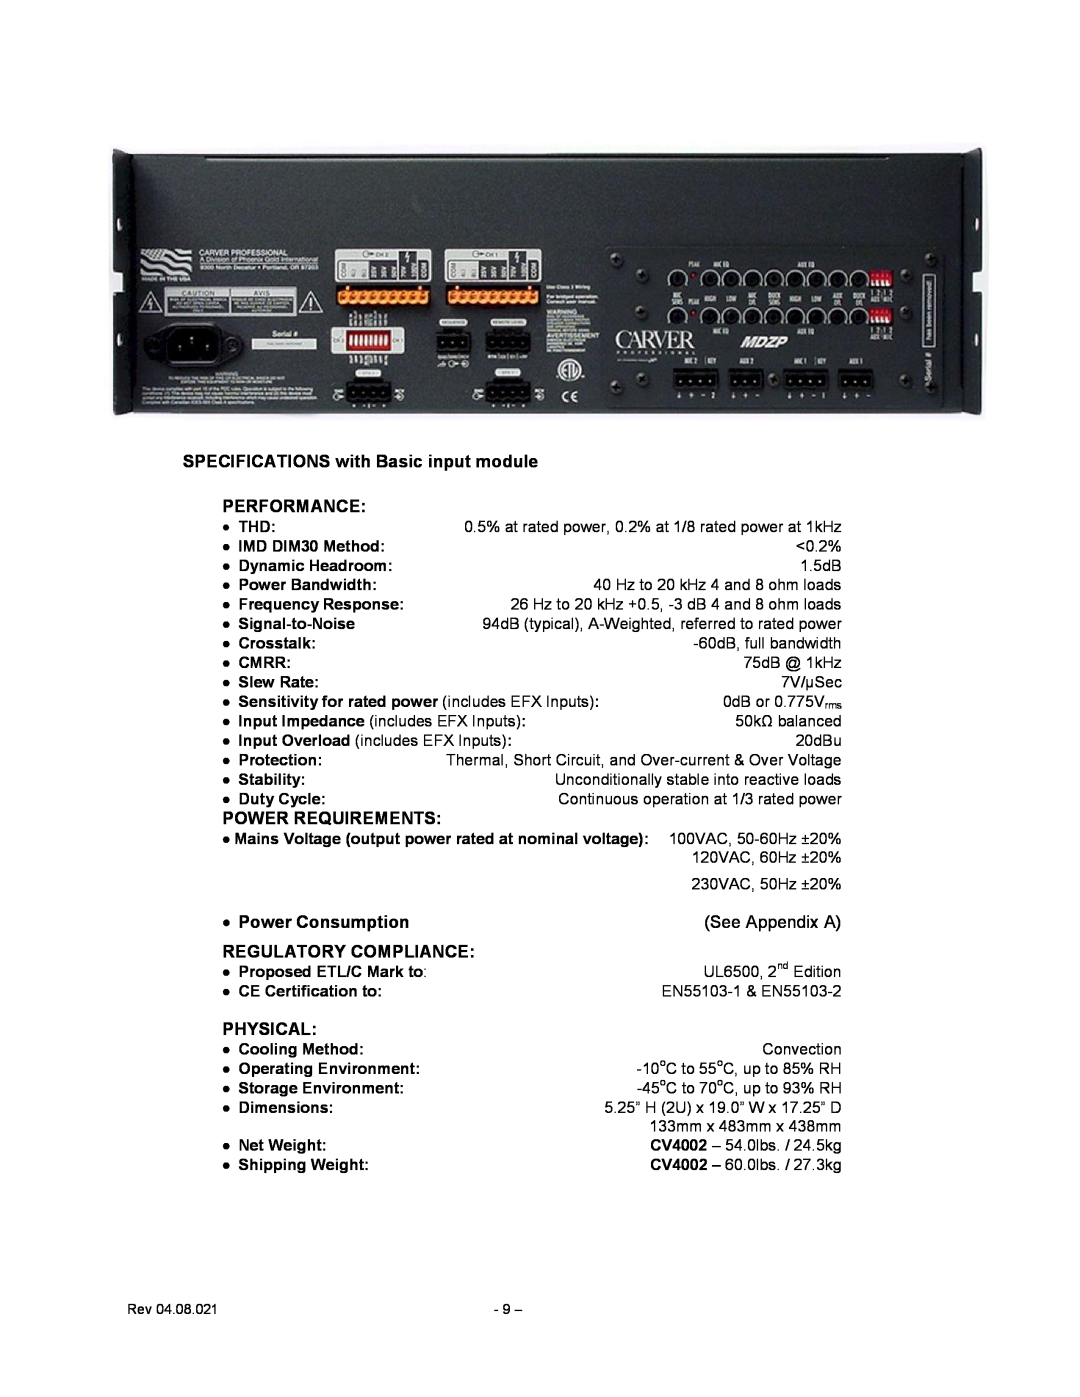 Carver CV Series SPECIFICATIONS with Basic input module, Performance, Power Requirements, Power Consumption, Physical 